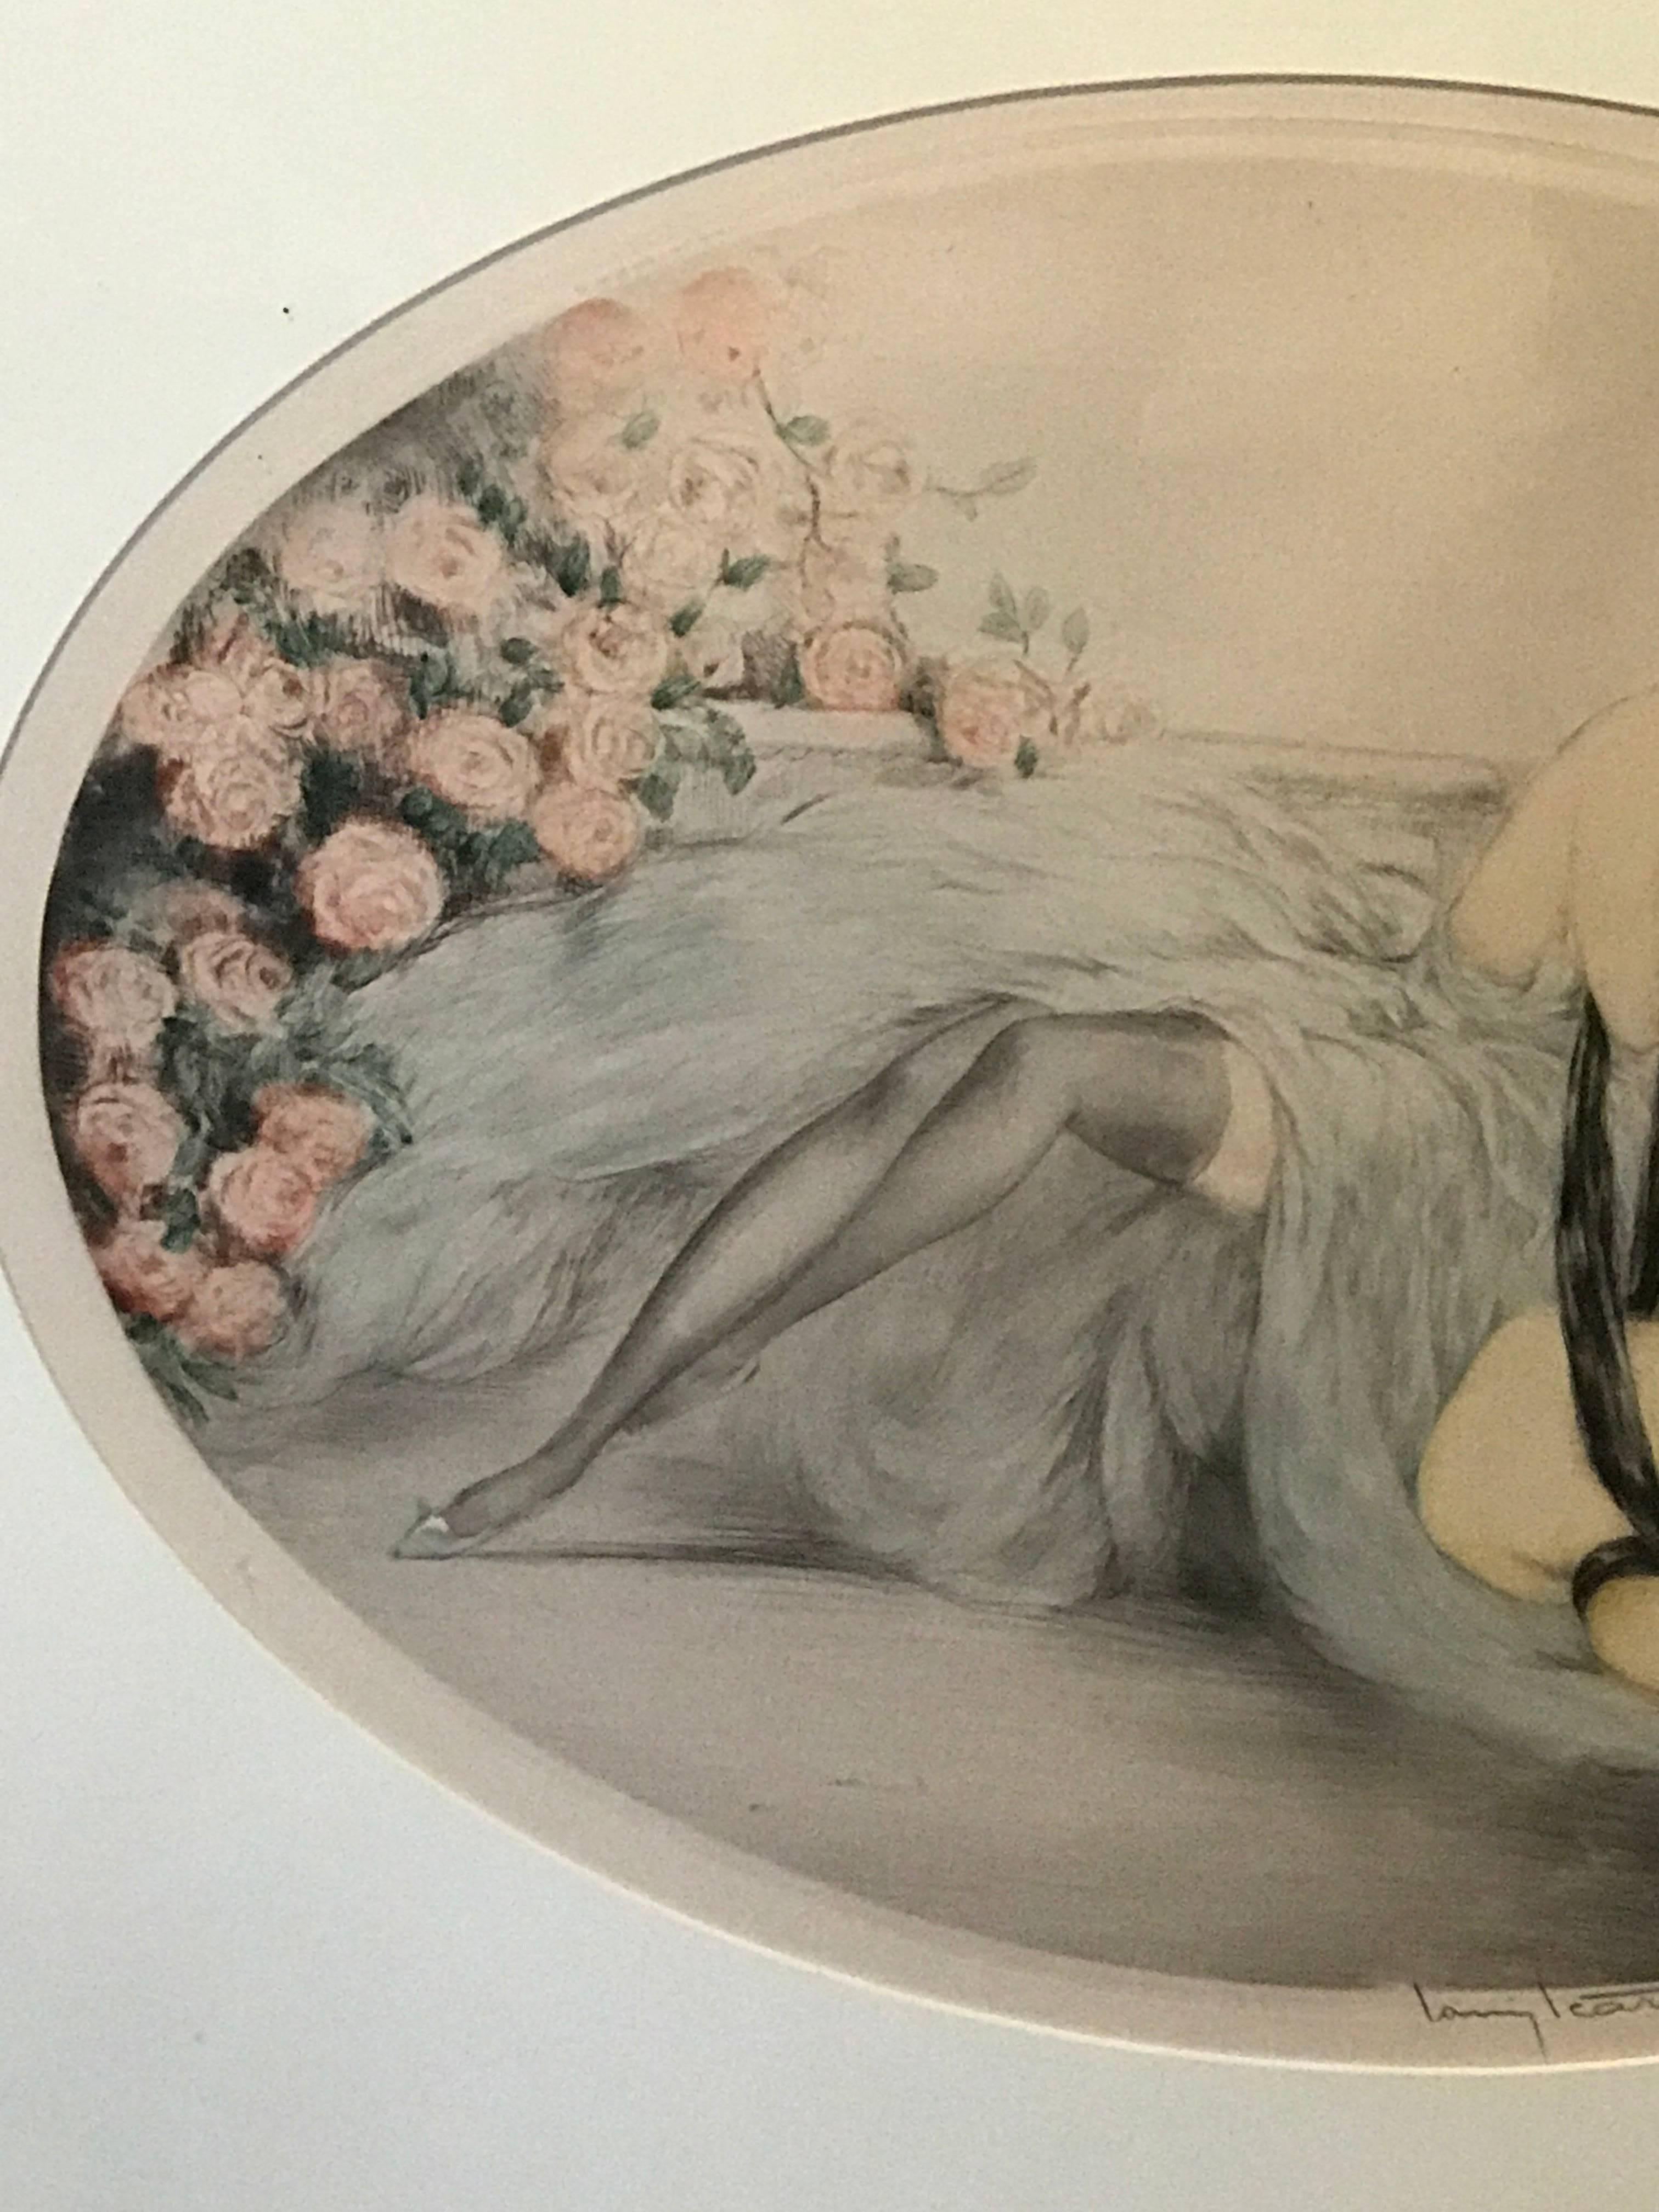 Louis Icart, French 1888-1950
"LES ROSES" (BELLE ROSE) 
1933. Pencil signed and with the artist''s blindstamp in the margin, handcolored etching on BFK Rives. Copyright top left "1933 by L. Icart Sty., N.Y." Also inscribed